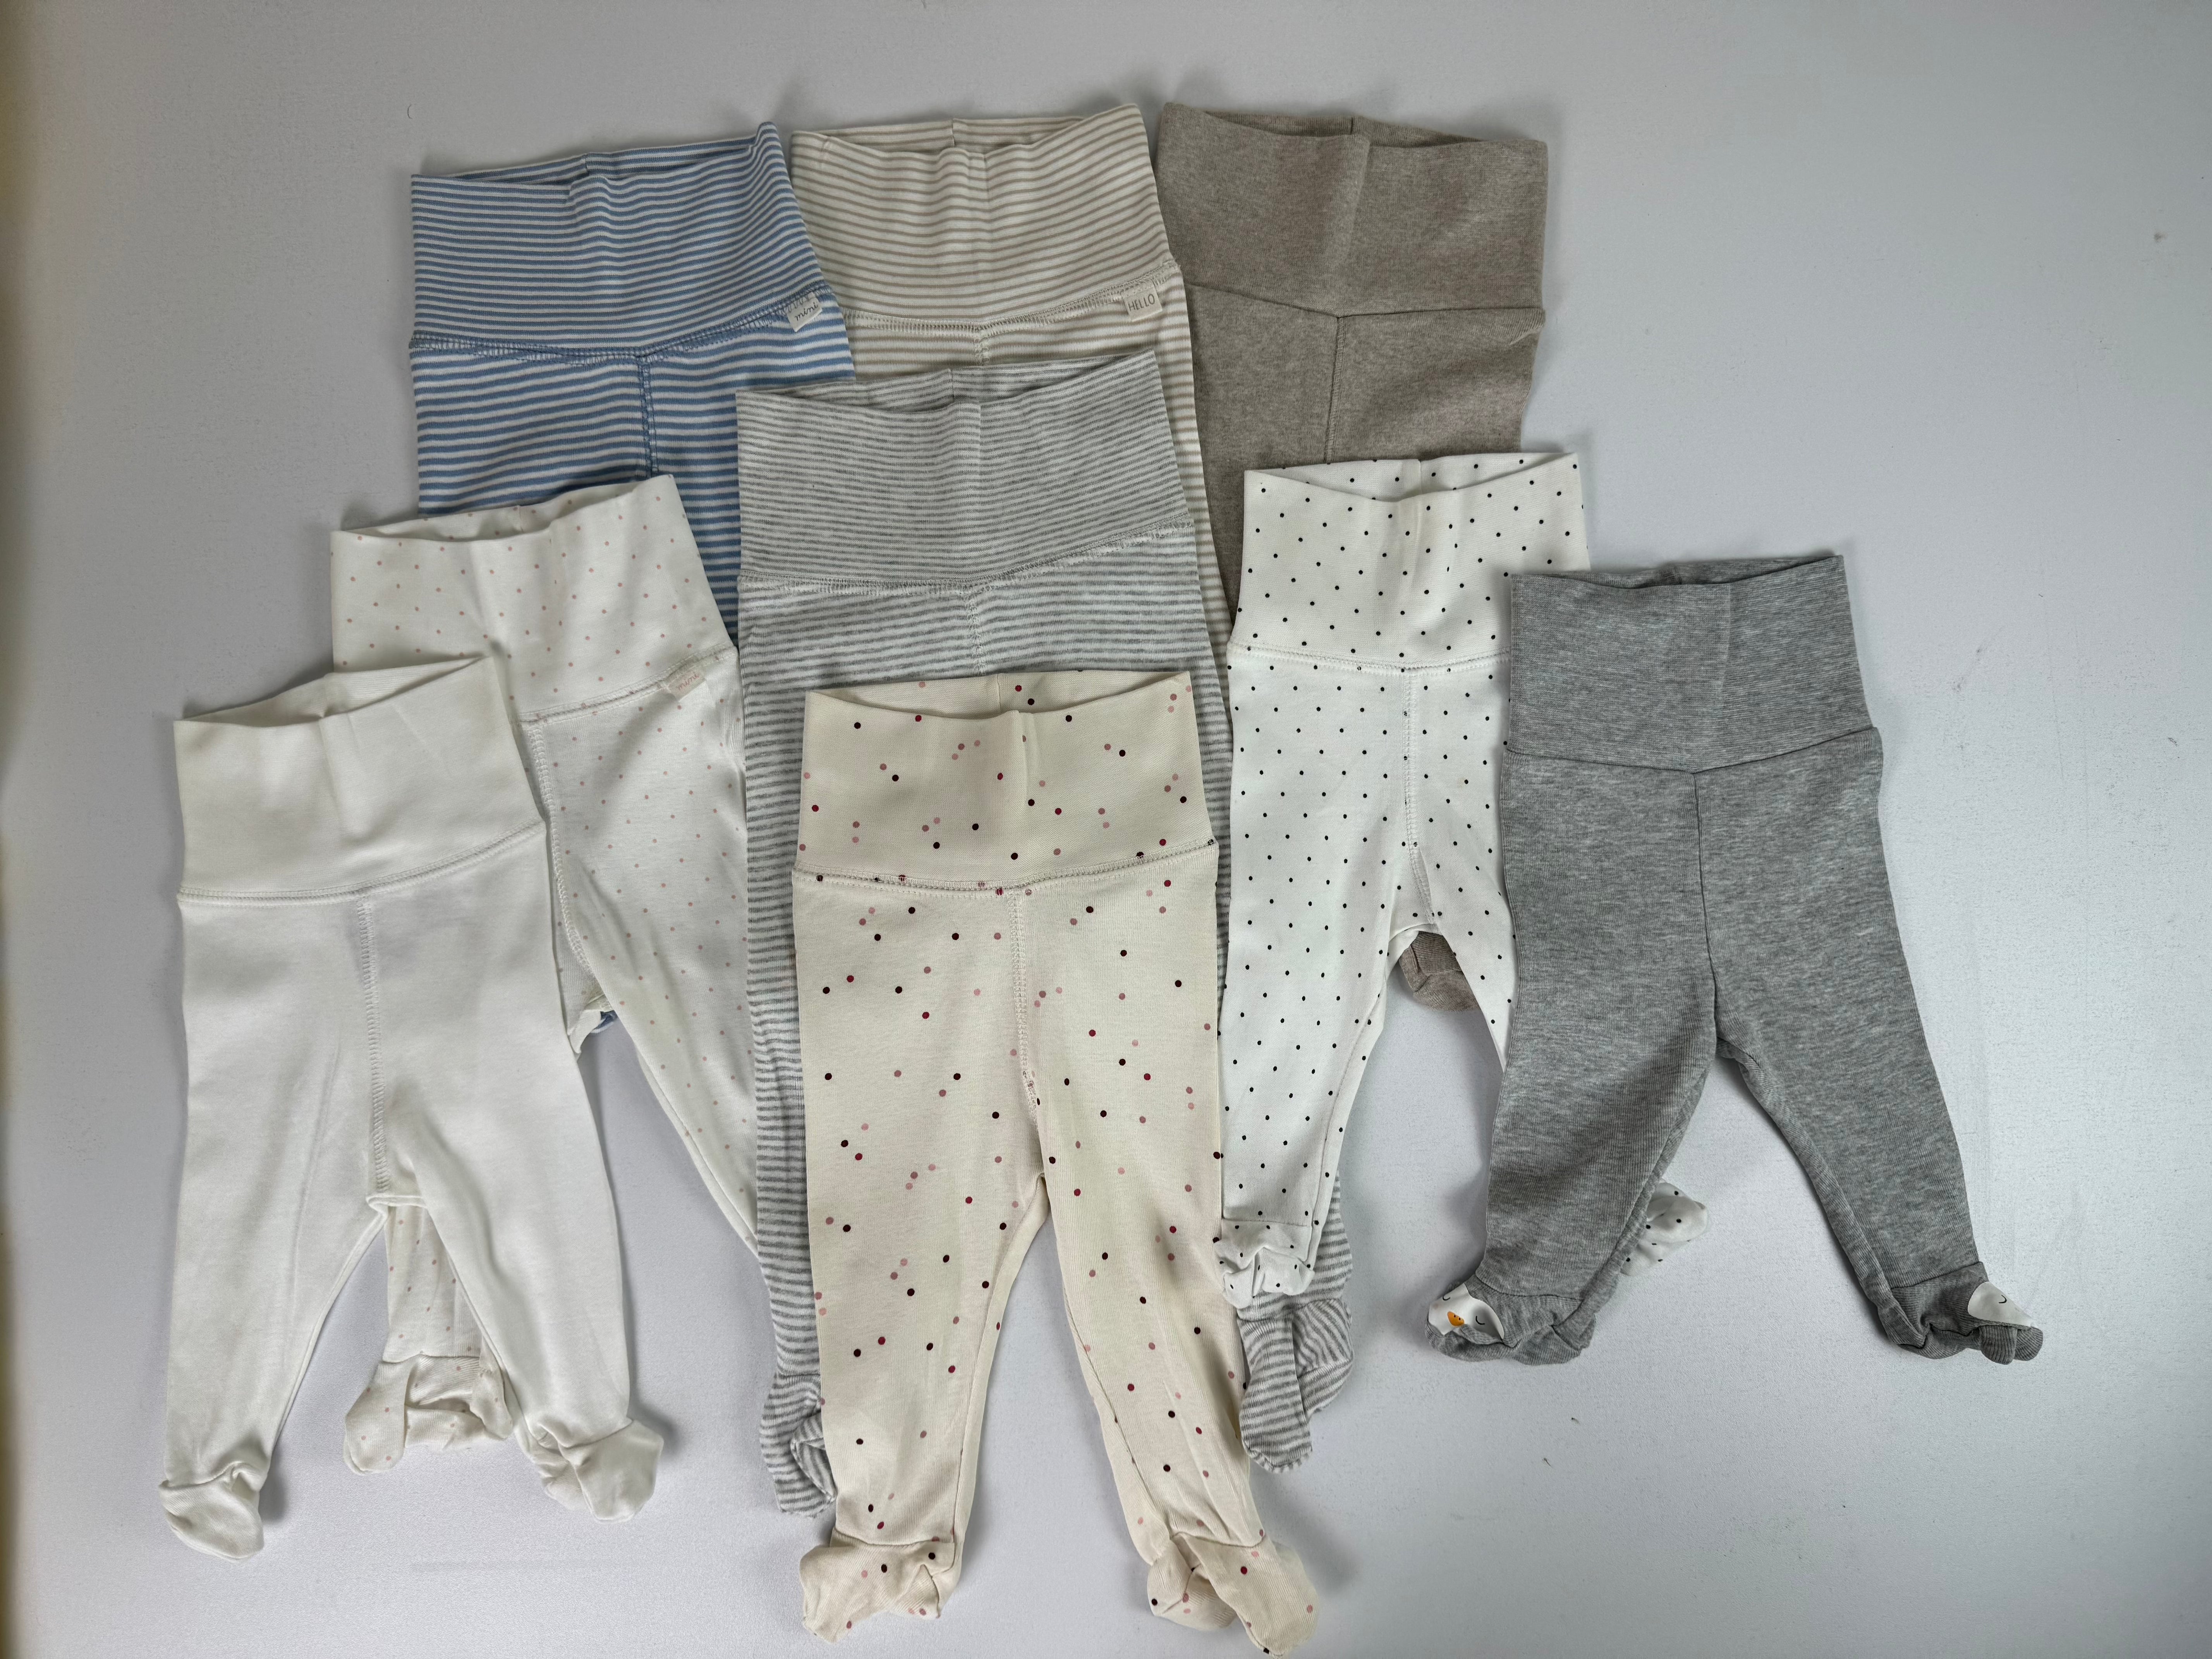 5 Pcs Organic Cotton Made Baby Trouser With Socks